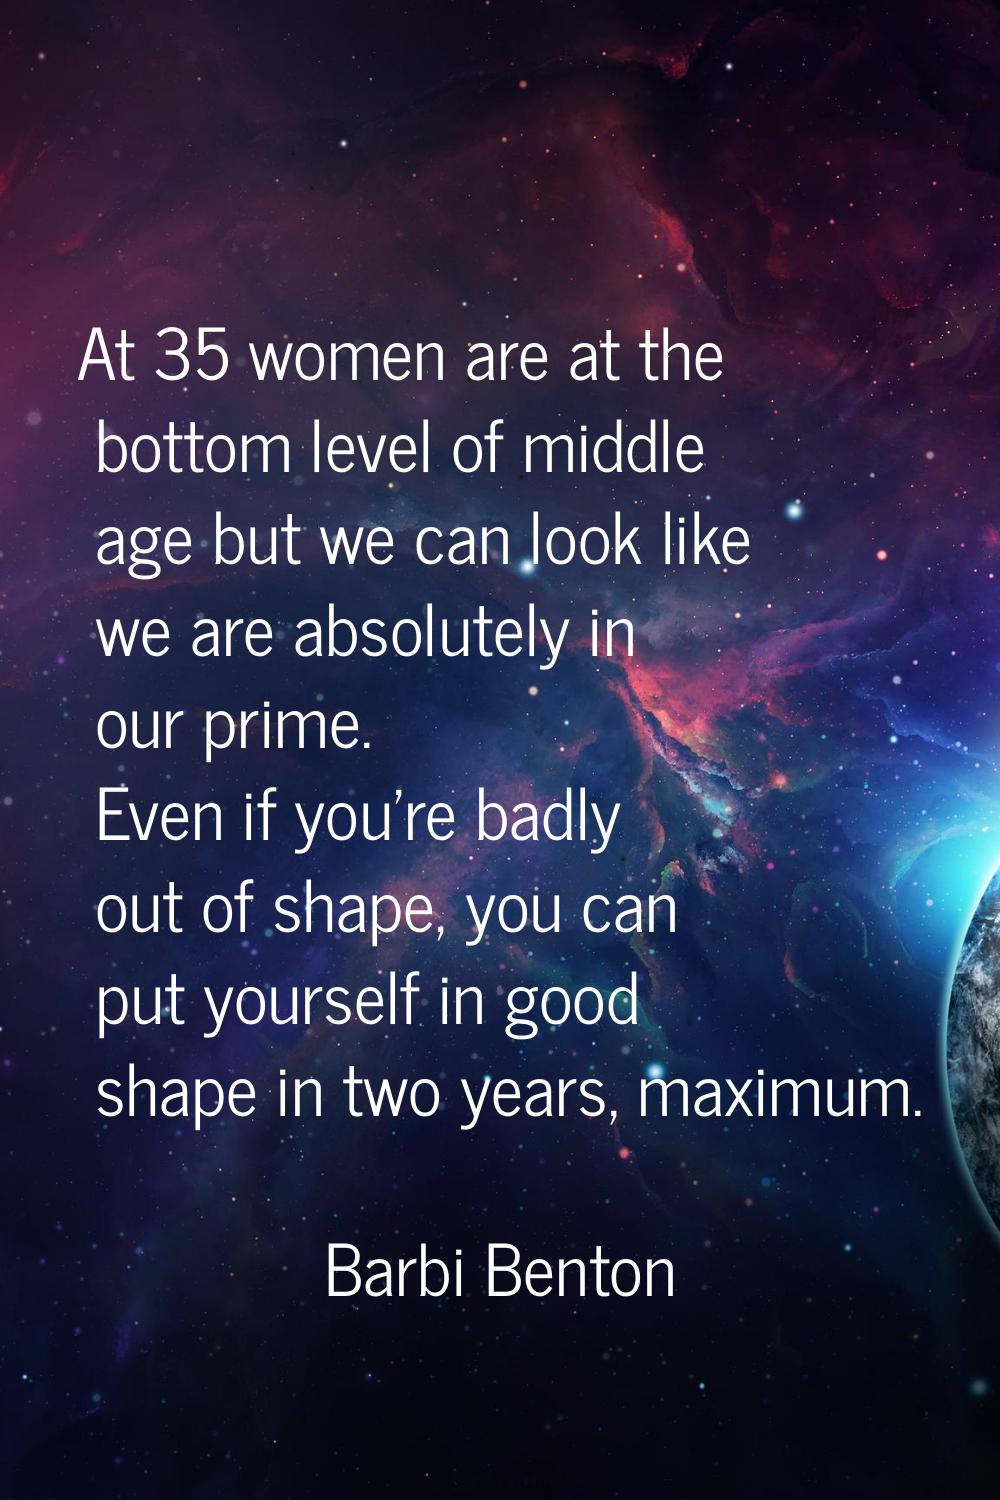 At 35 women are at the bottom level of middle age but we can look like we are absolutely in our pri